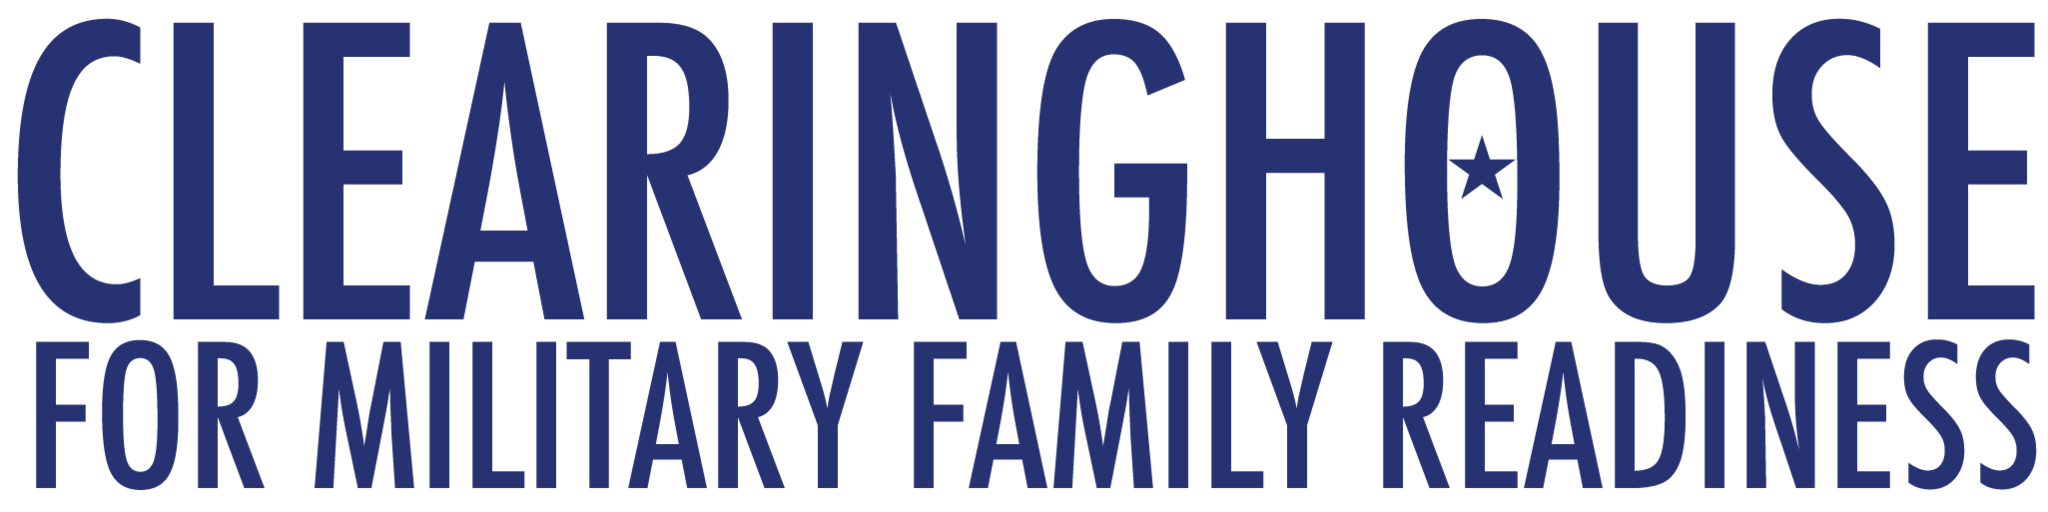 clearinghouse for military family readiness.png